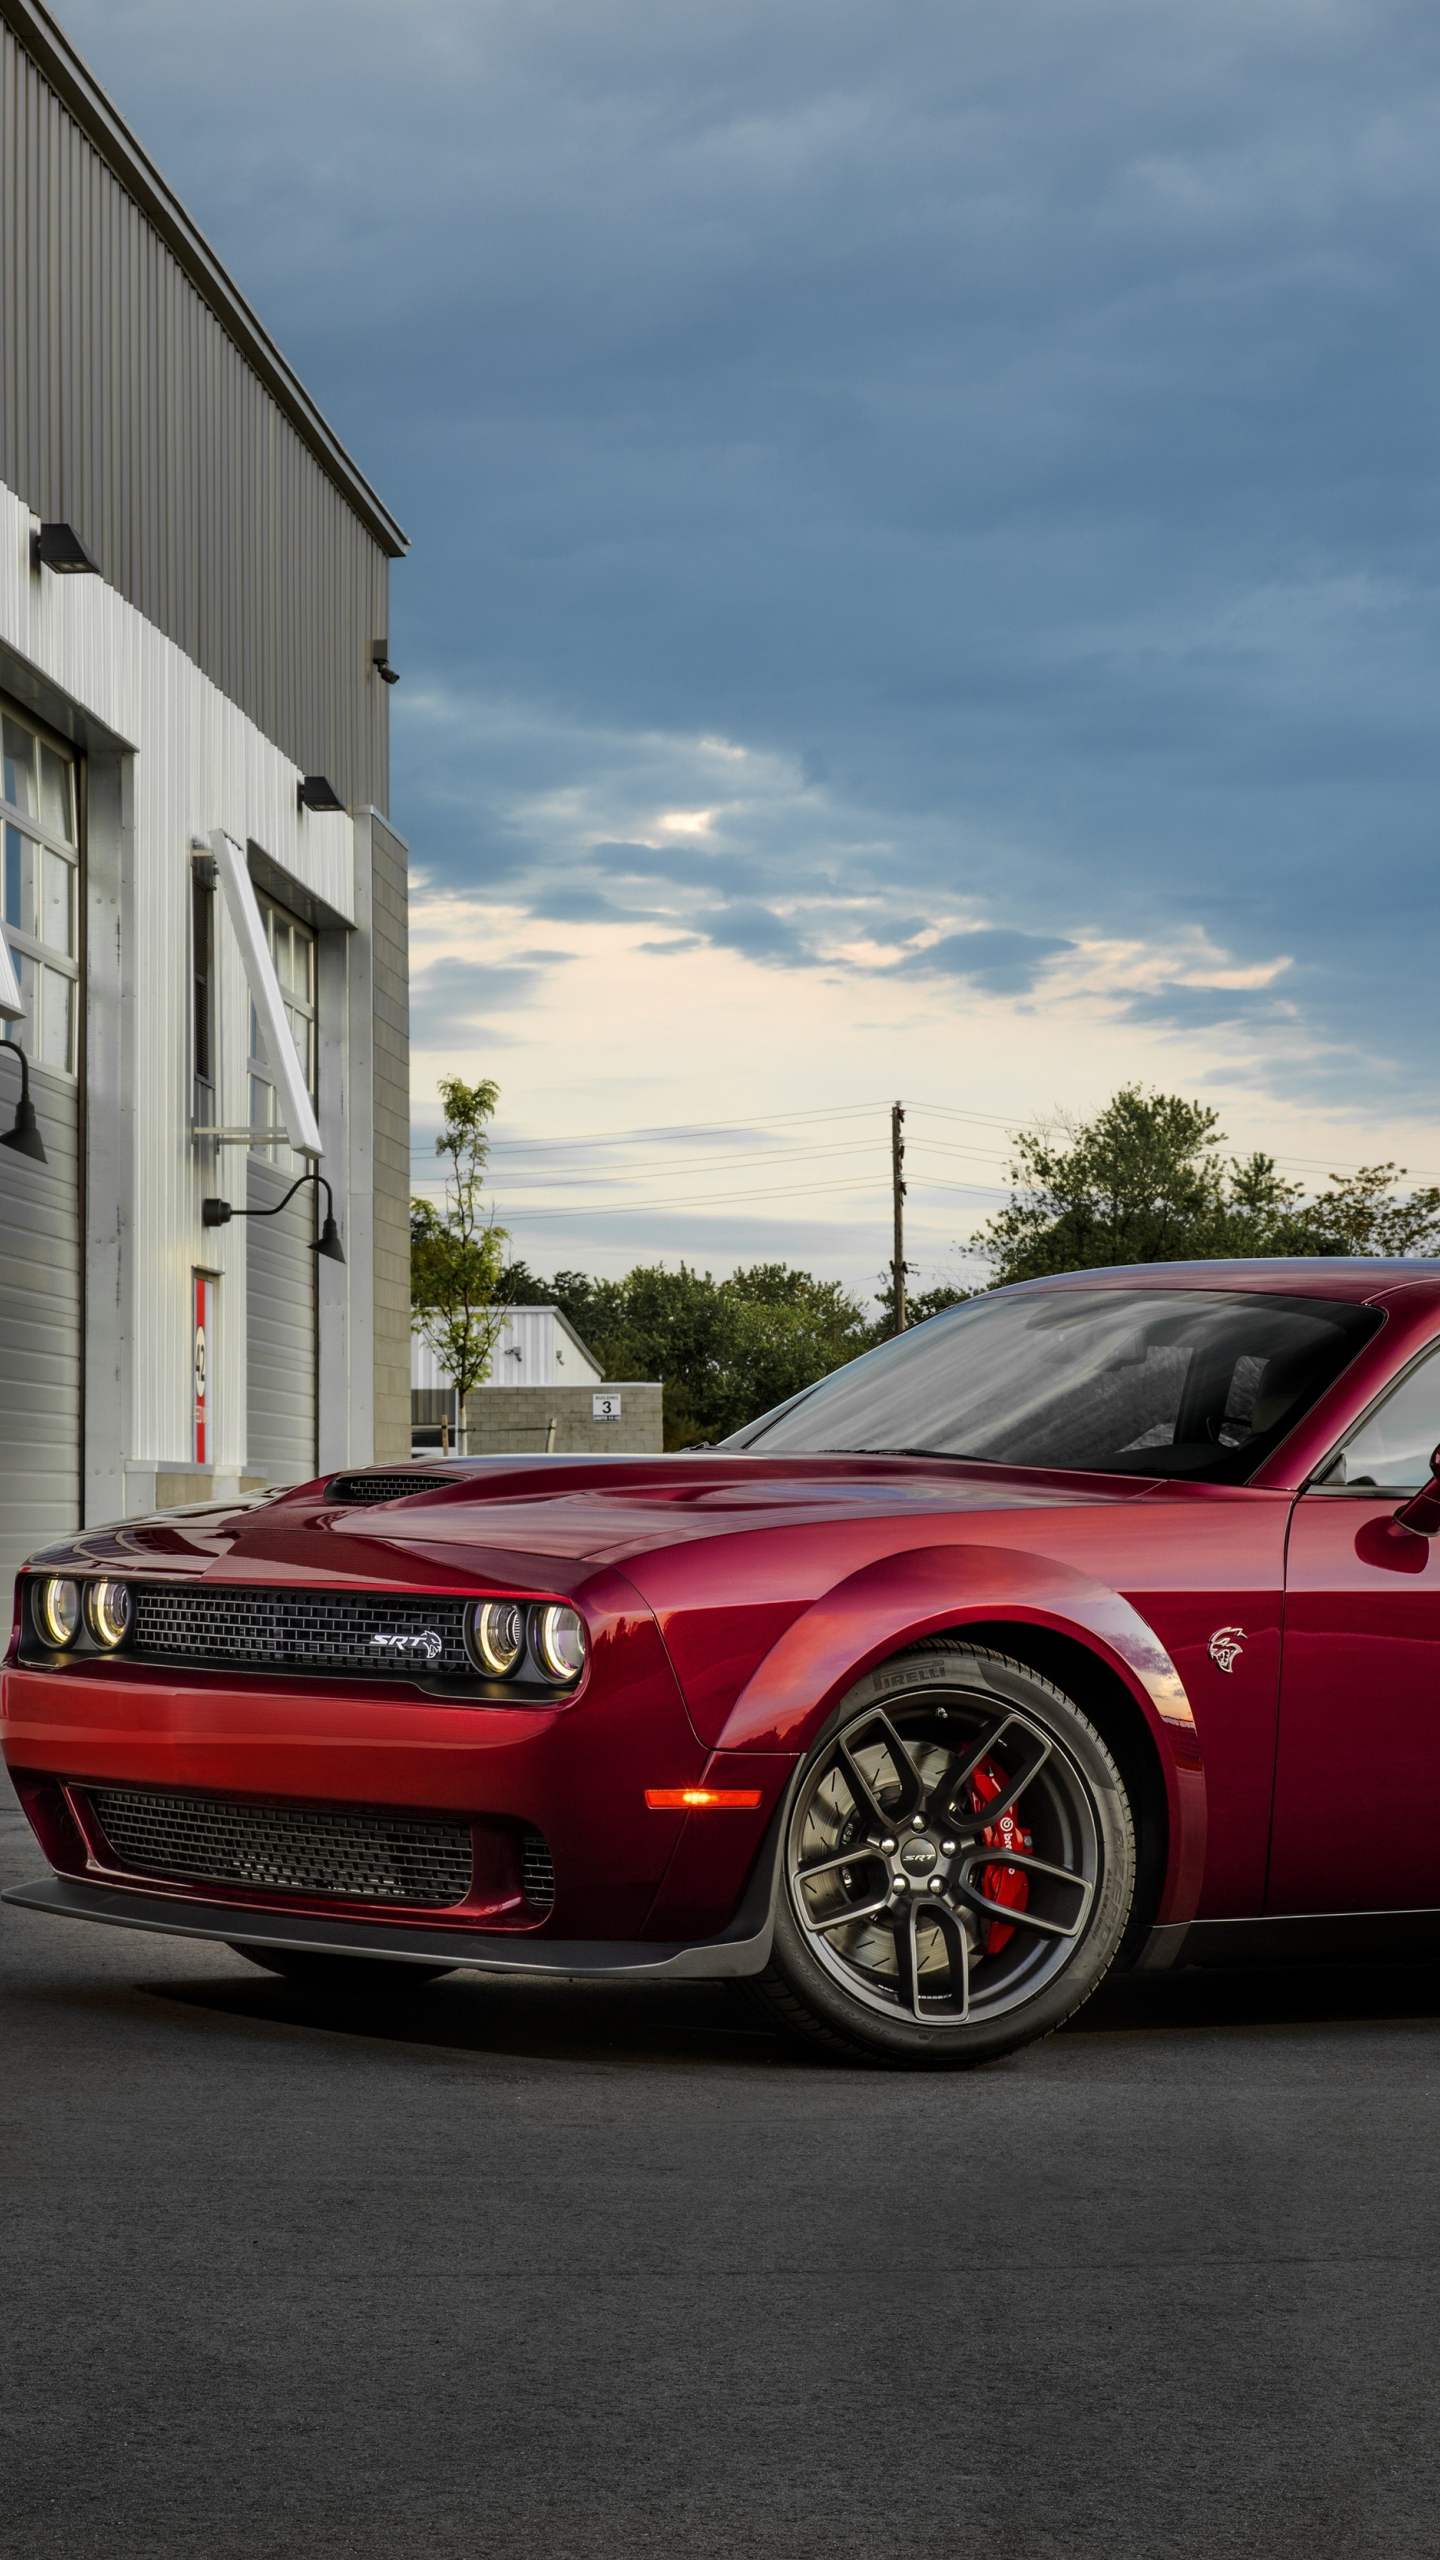 Download wallpaper 1440x2560 dodge challenger demon srt, blood-red, muscle  car, qhd samsung galaxy s6, s7, edge, note, lg g4, 1440x2560 hd background,  19533